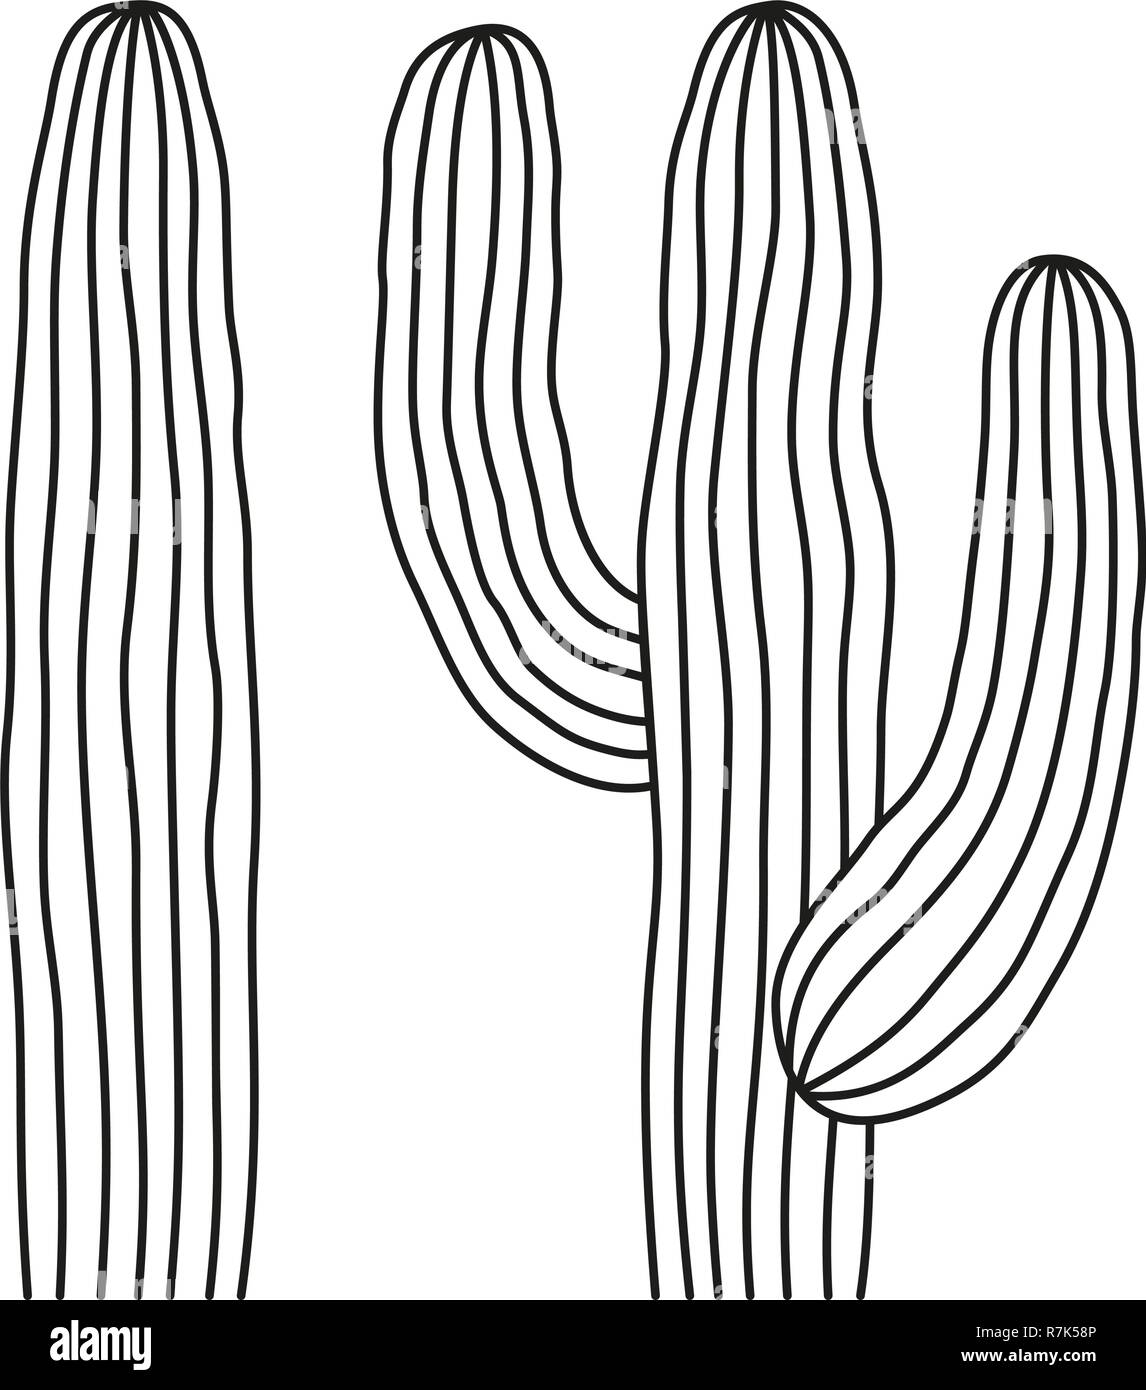 Line art black and white mexican cactus Stock Vector